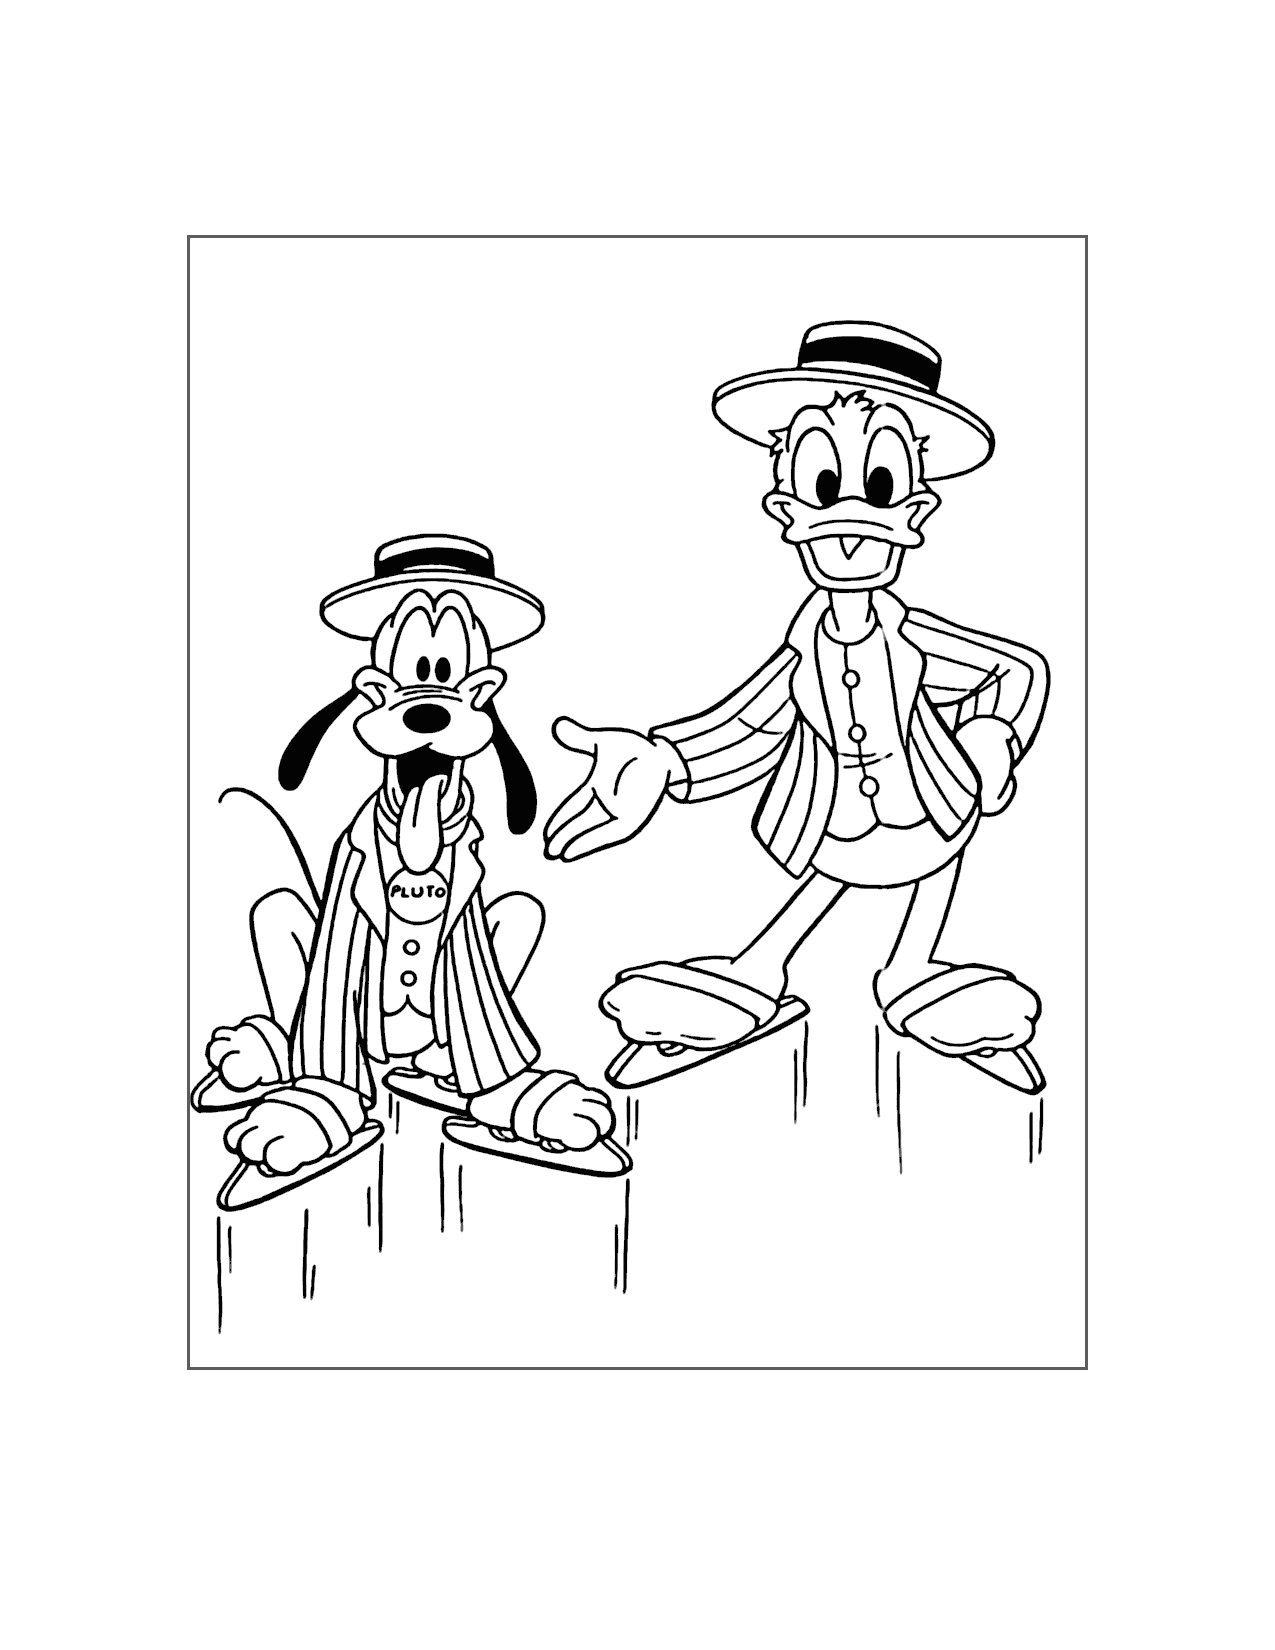 Pluto And Donald On Ice Coloring Page